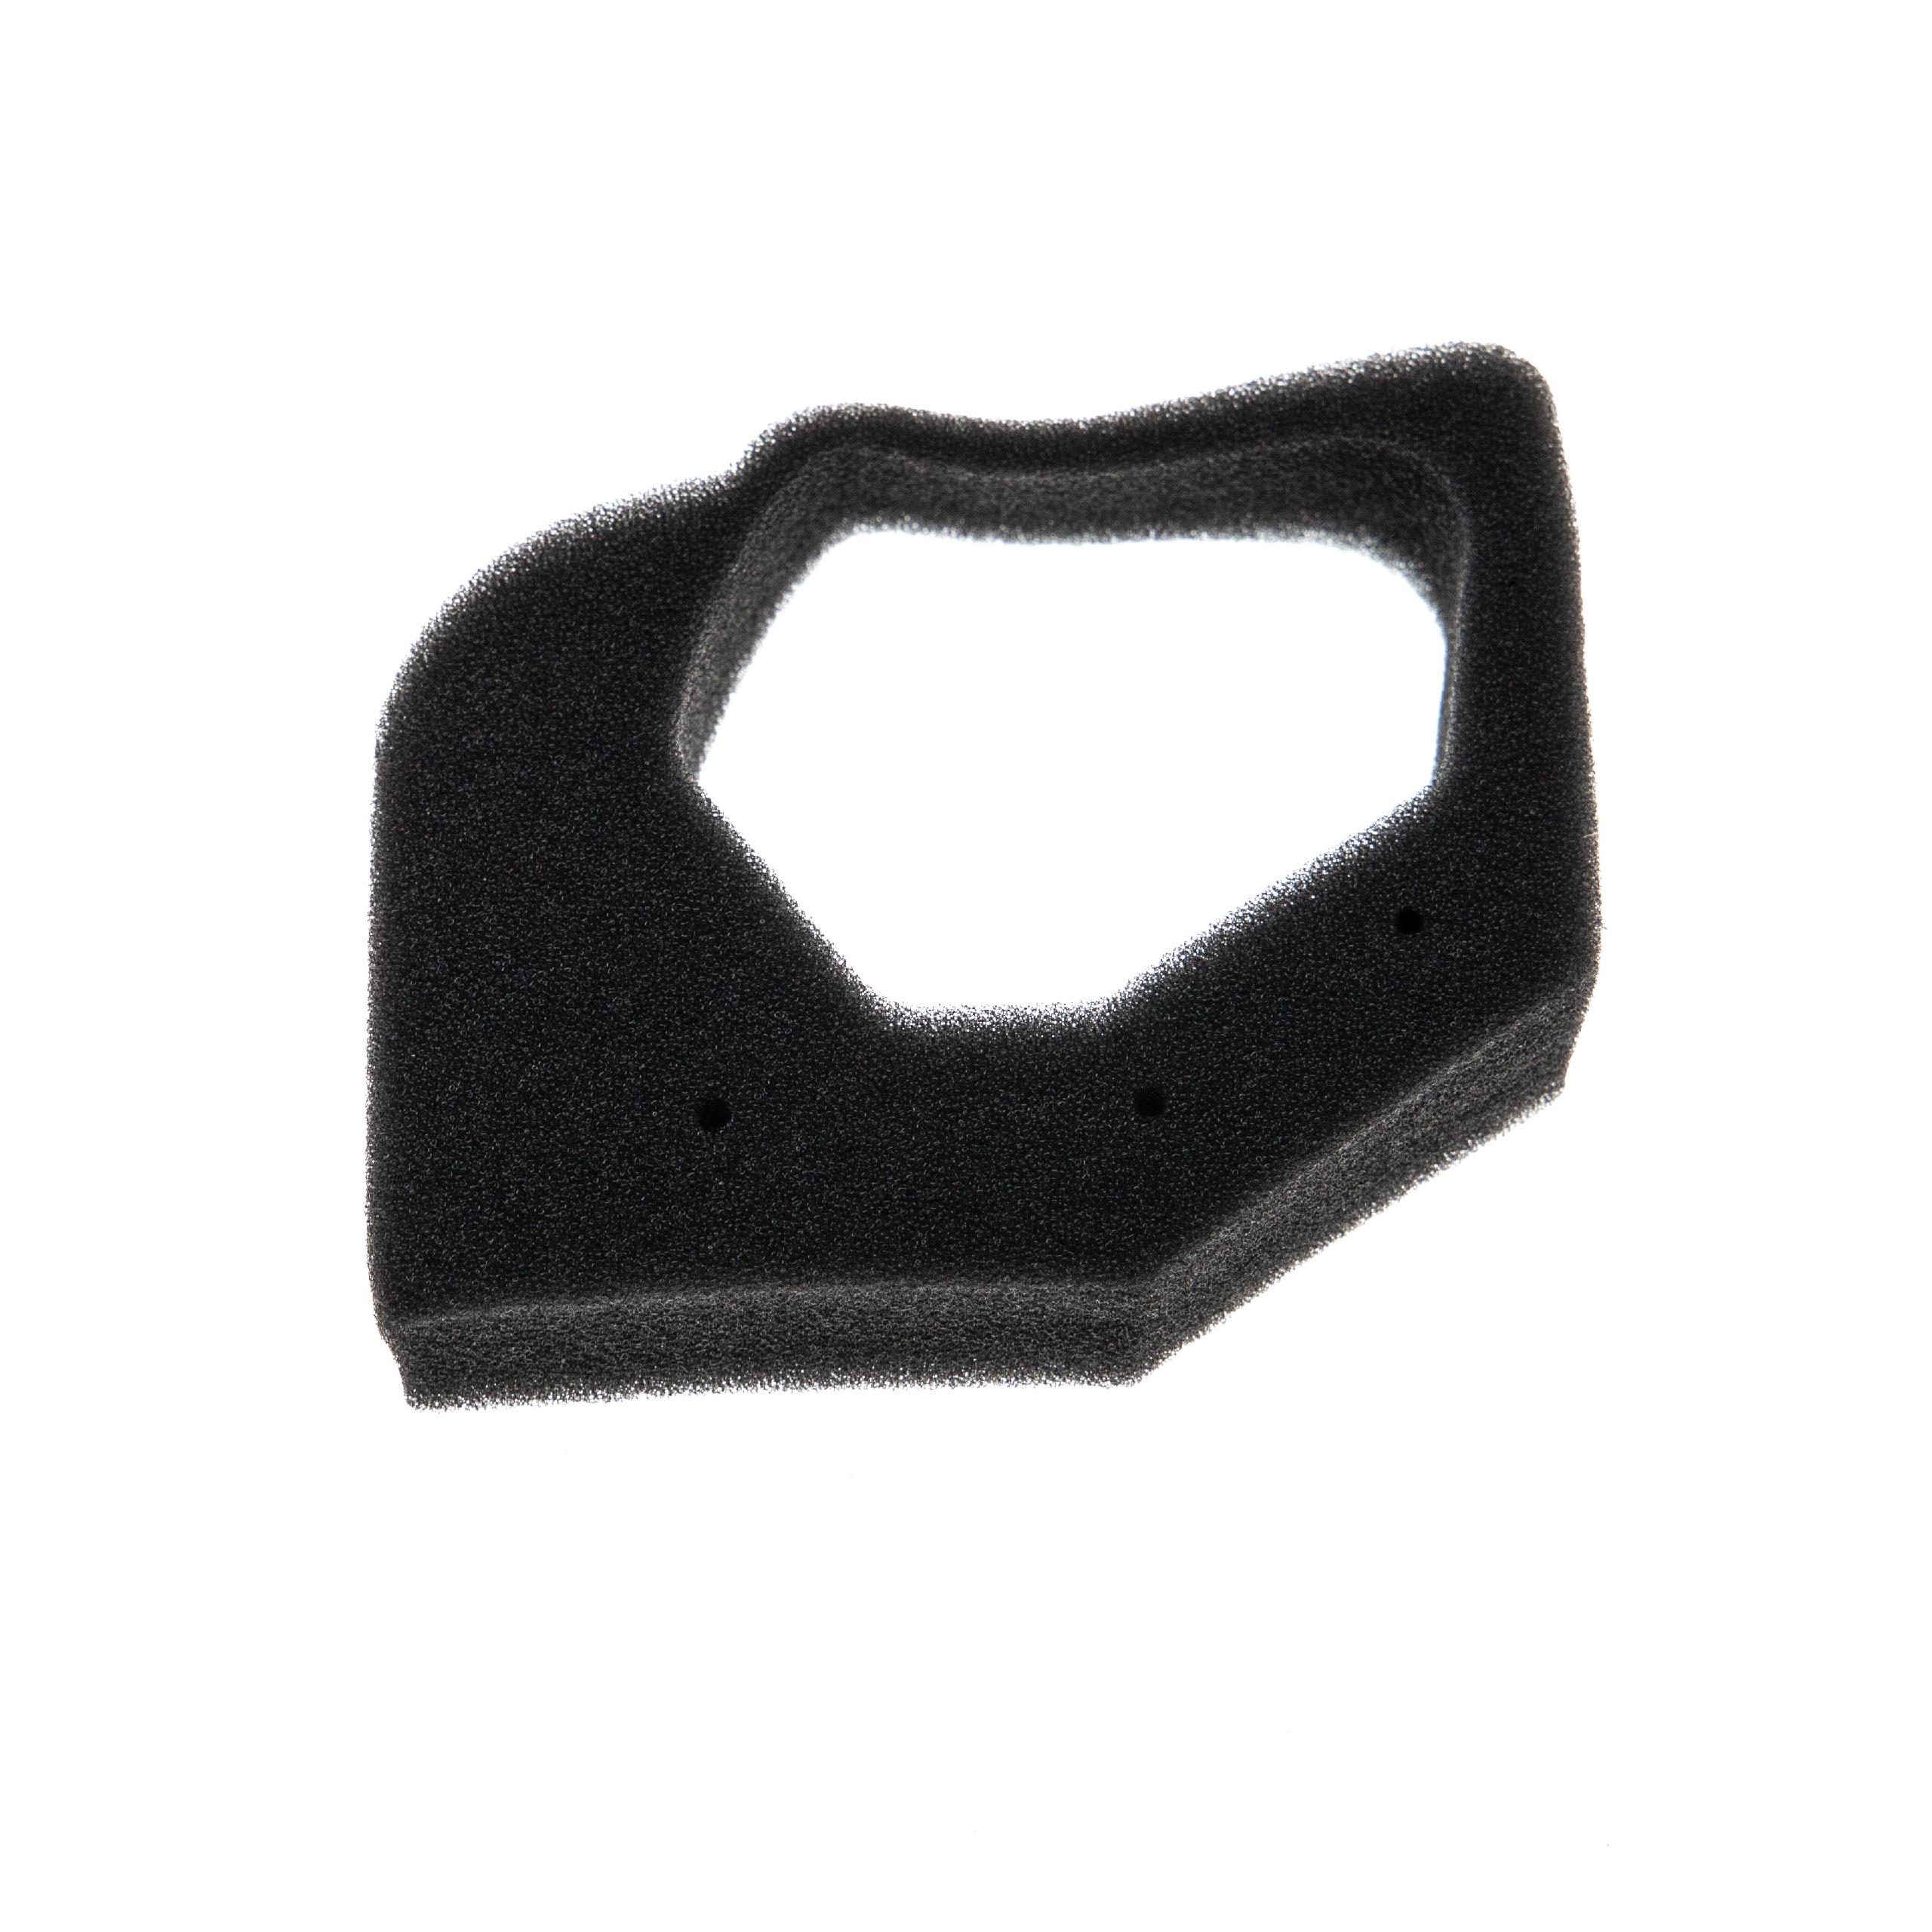 vhbw Foam Filter replacement for Honda 17211Z0H000, 17211-Z0H-000 for String Trimmer